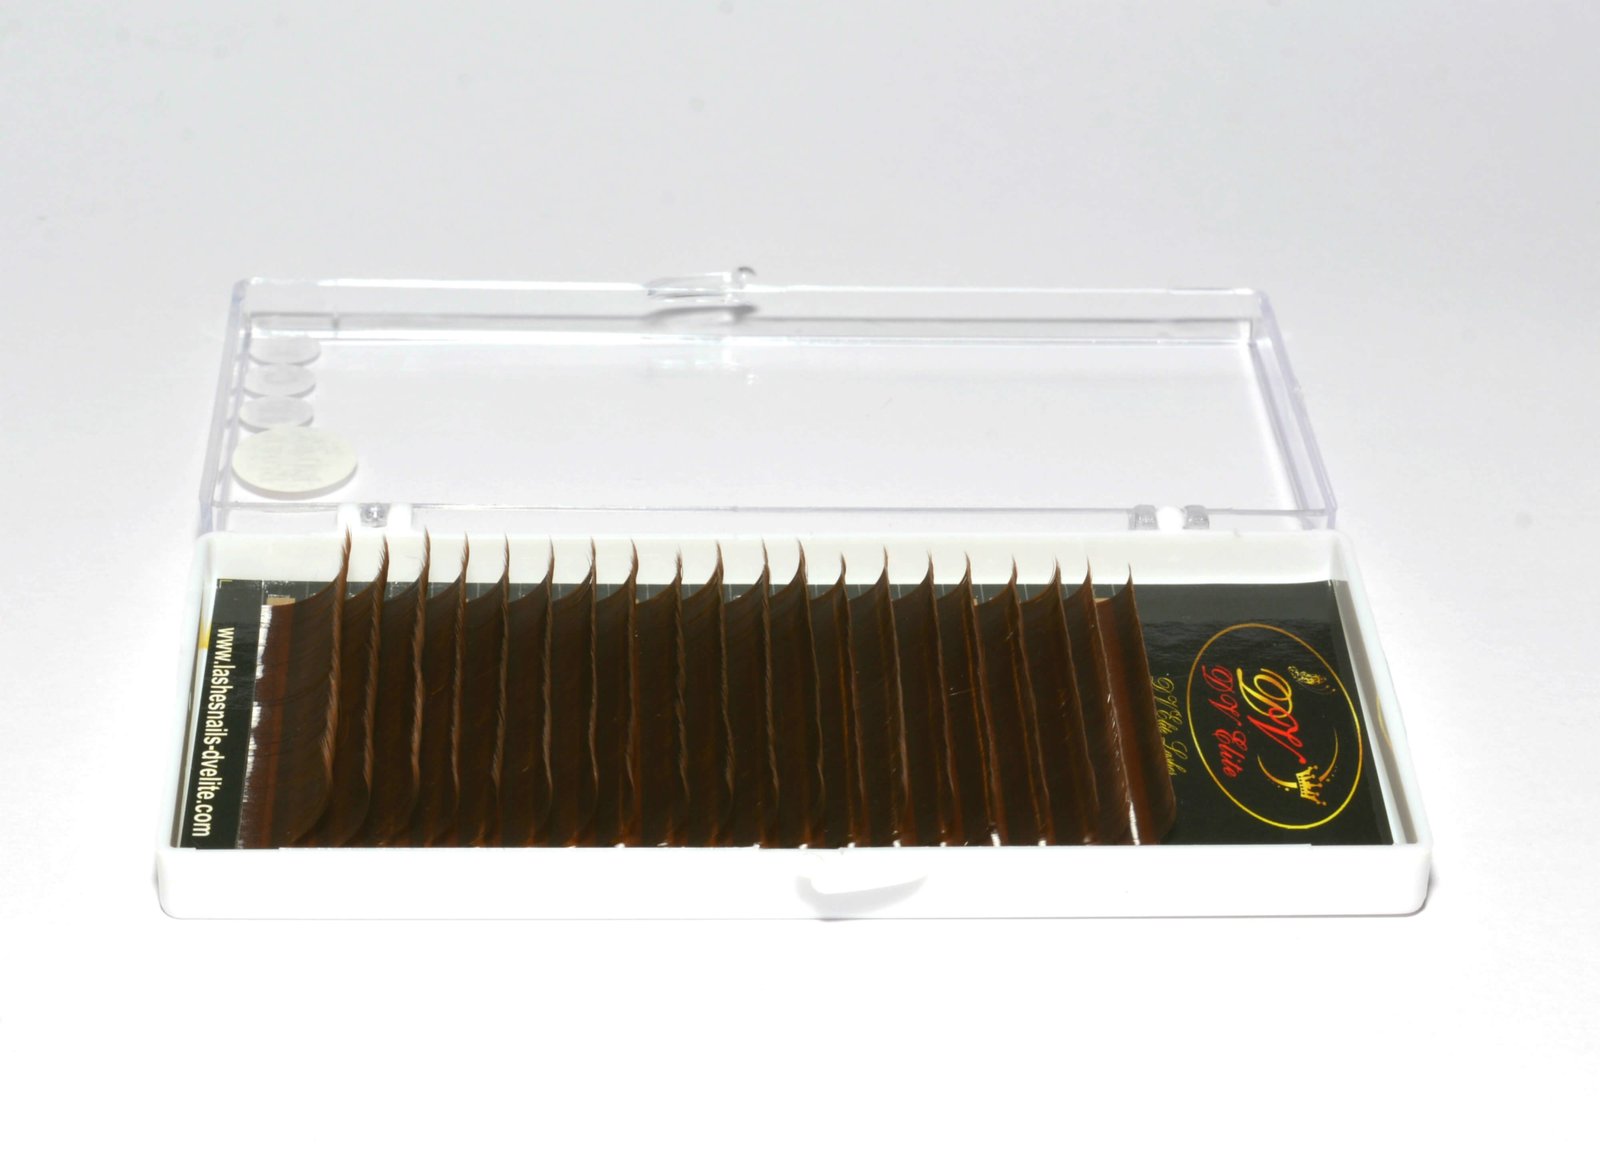 Lashes 0.15 darkbrown Form: C - Length: Mix (8-15)